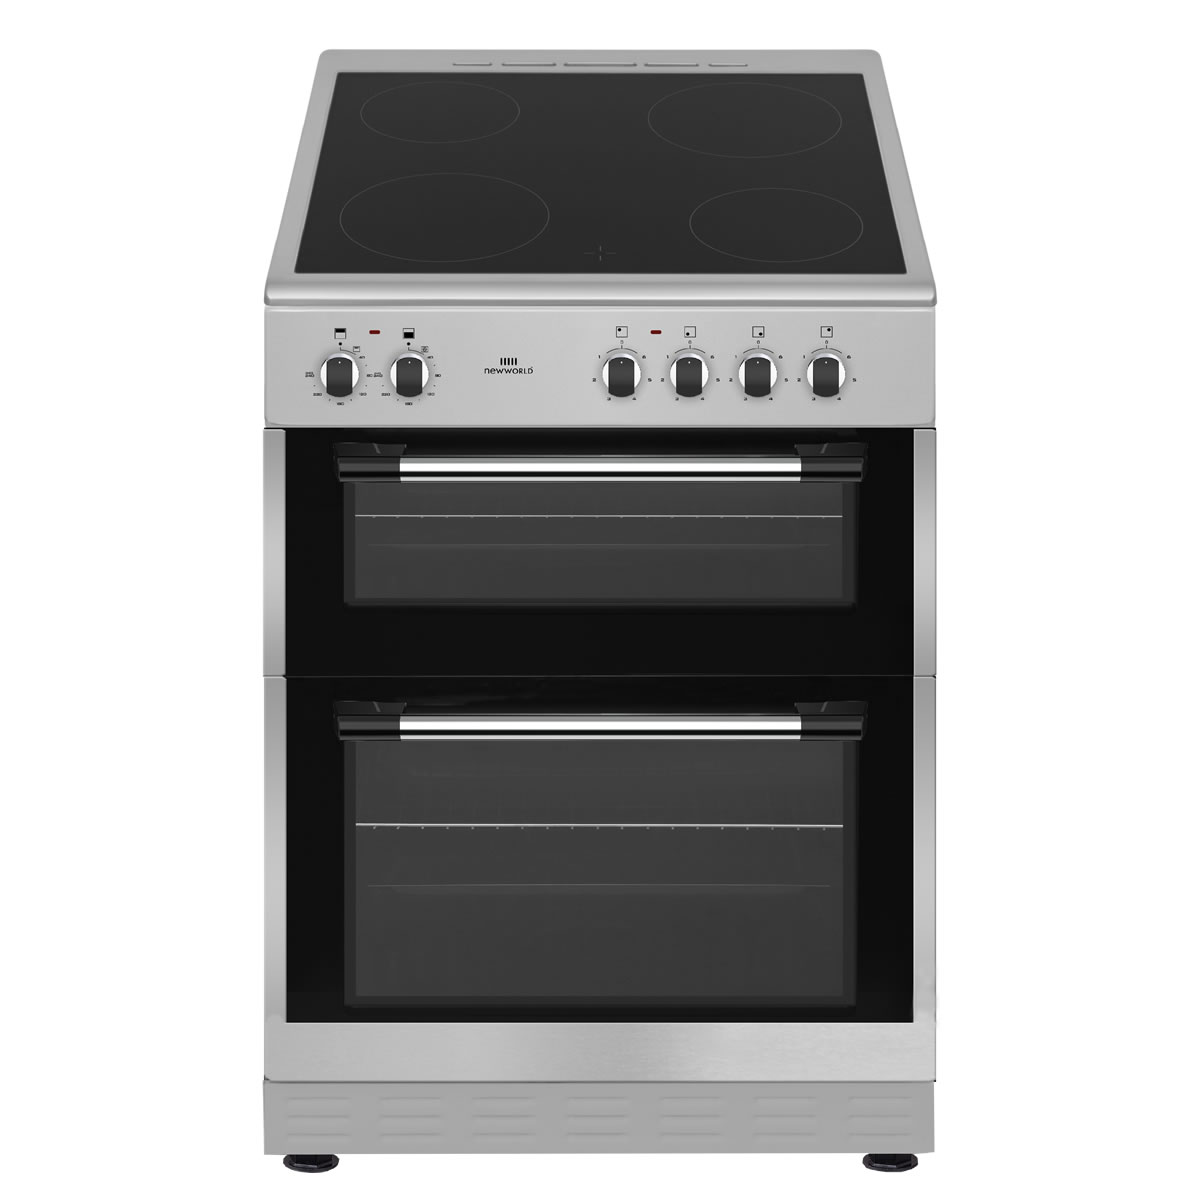 New-World 600mm Twin Cavity Electric Cooker Ceramic Hob Silver